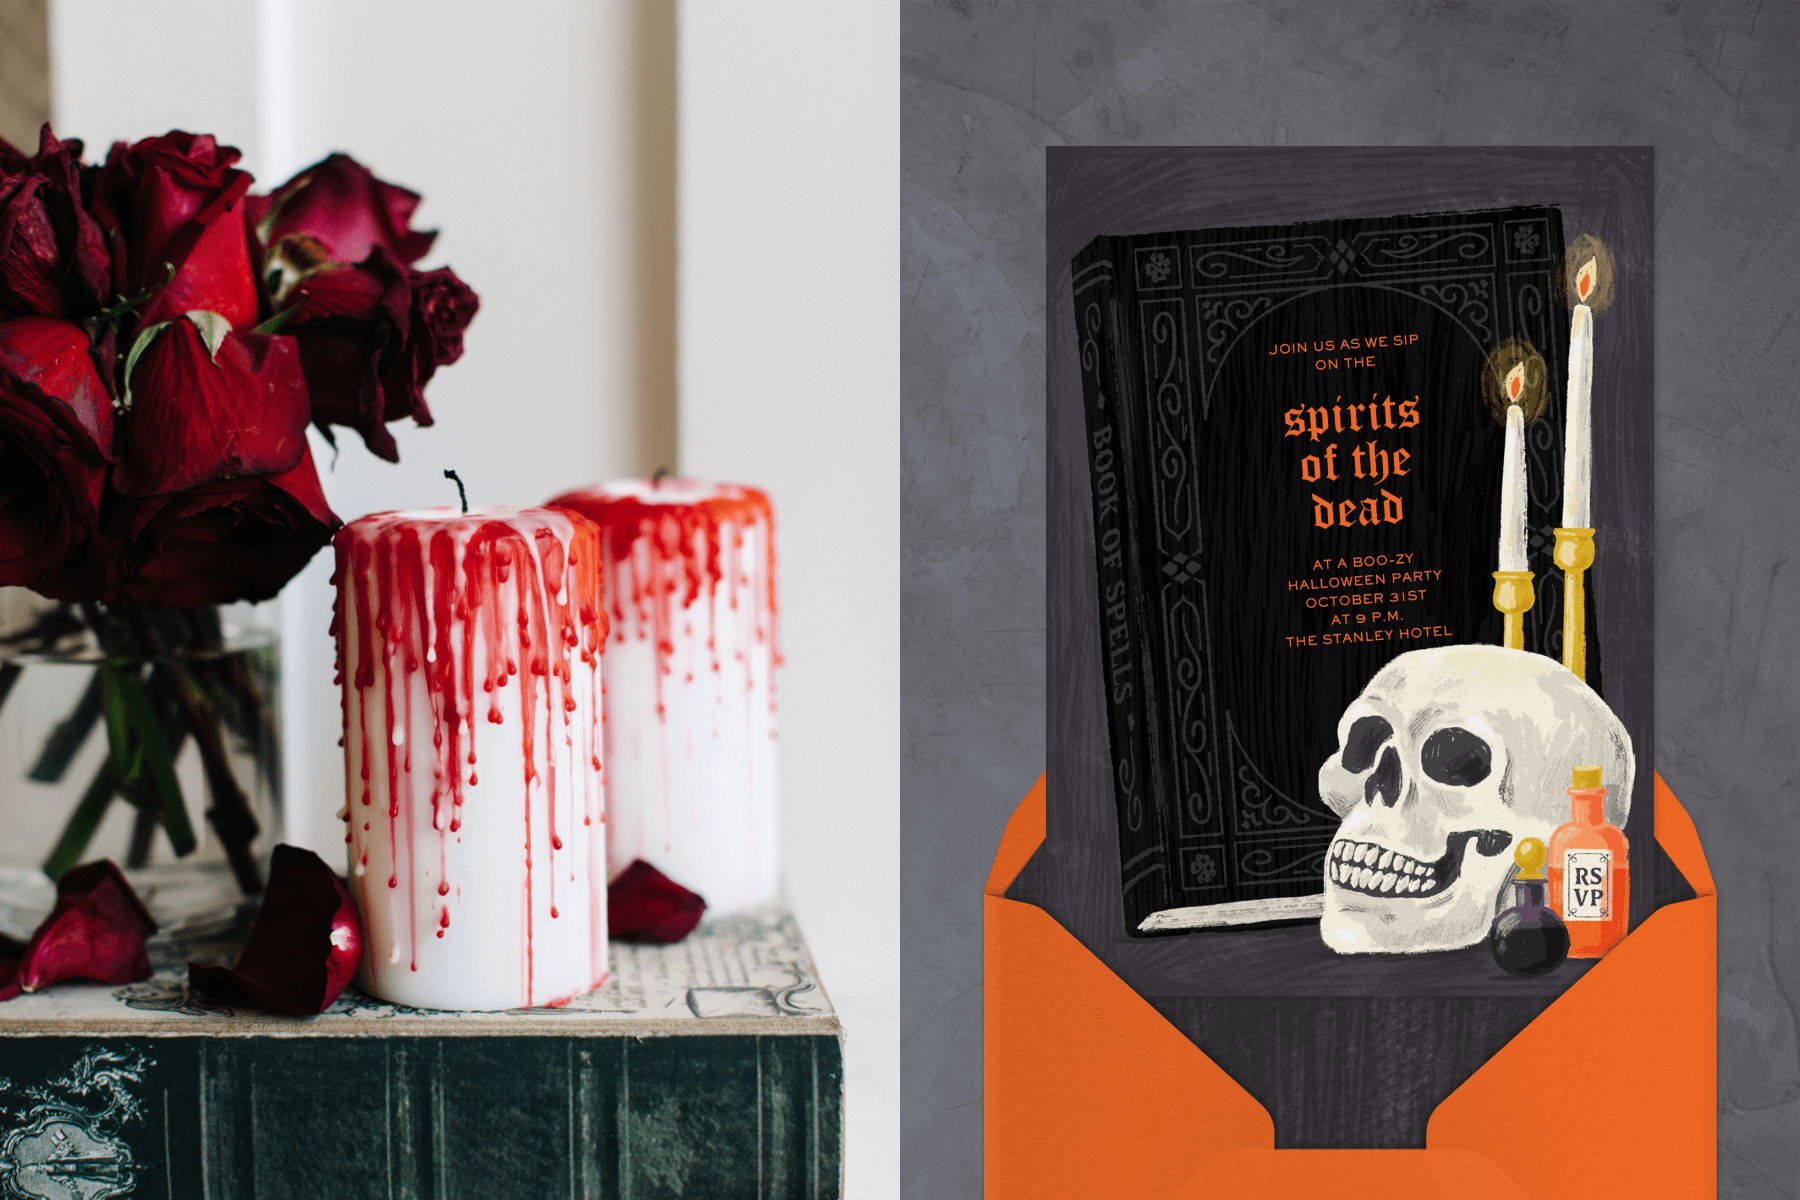 Left: Two white pillar candles dripping with “blood” next to wilting red roses in a vase. Right: An invitation has an image of a skull, poison bottle, and two candles in front of a black book that reads “spirits of the dead.”